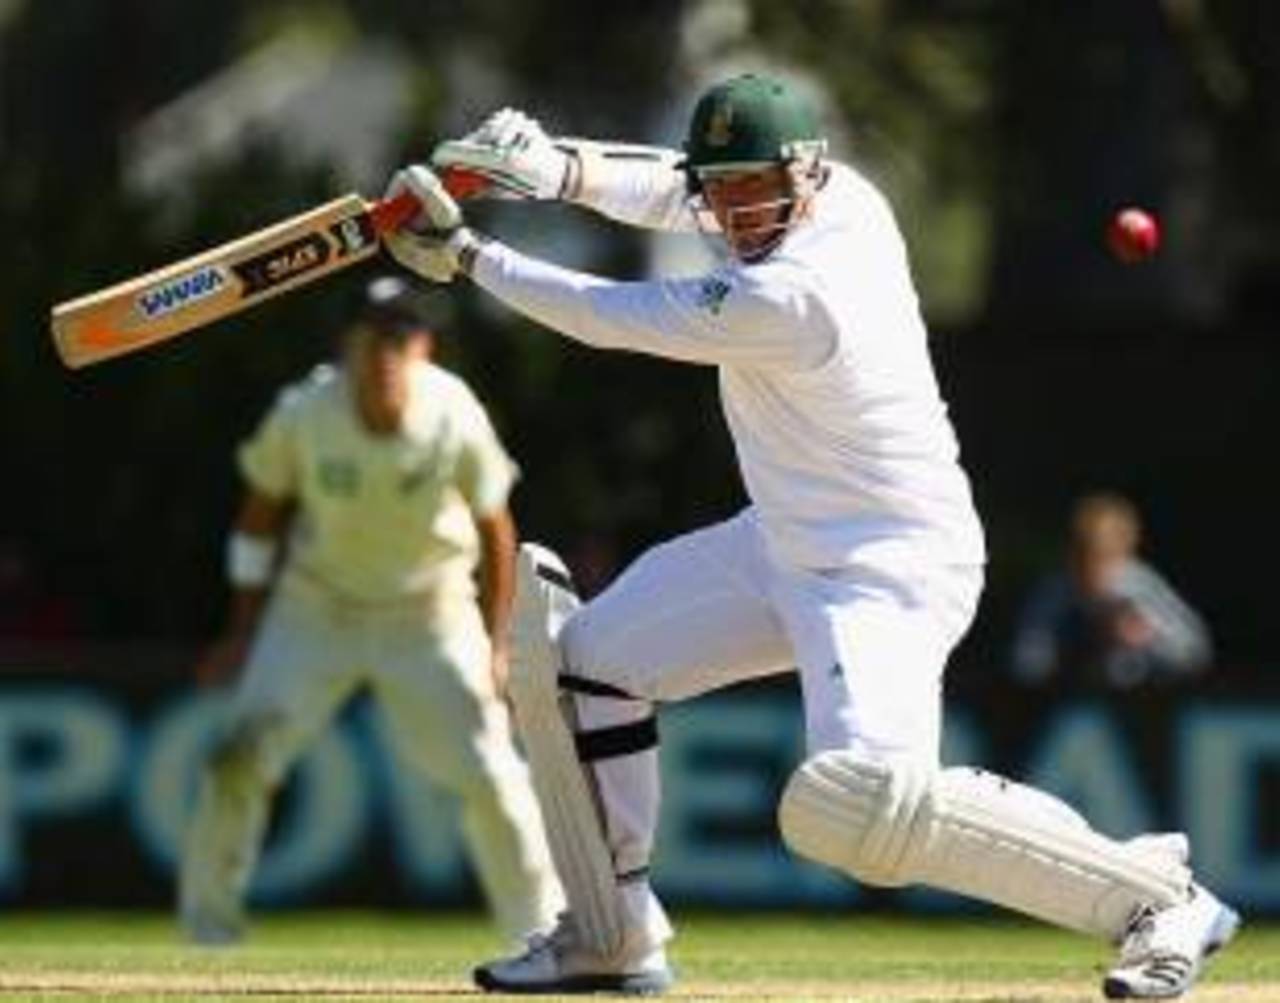 Graeme Smith cuts, New Zealand v South Africa, 1st Test, Dunedin, 3rd day, March 9, 2012